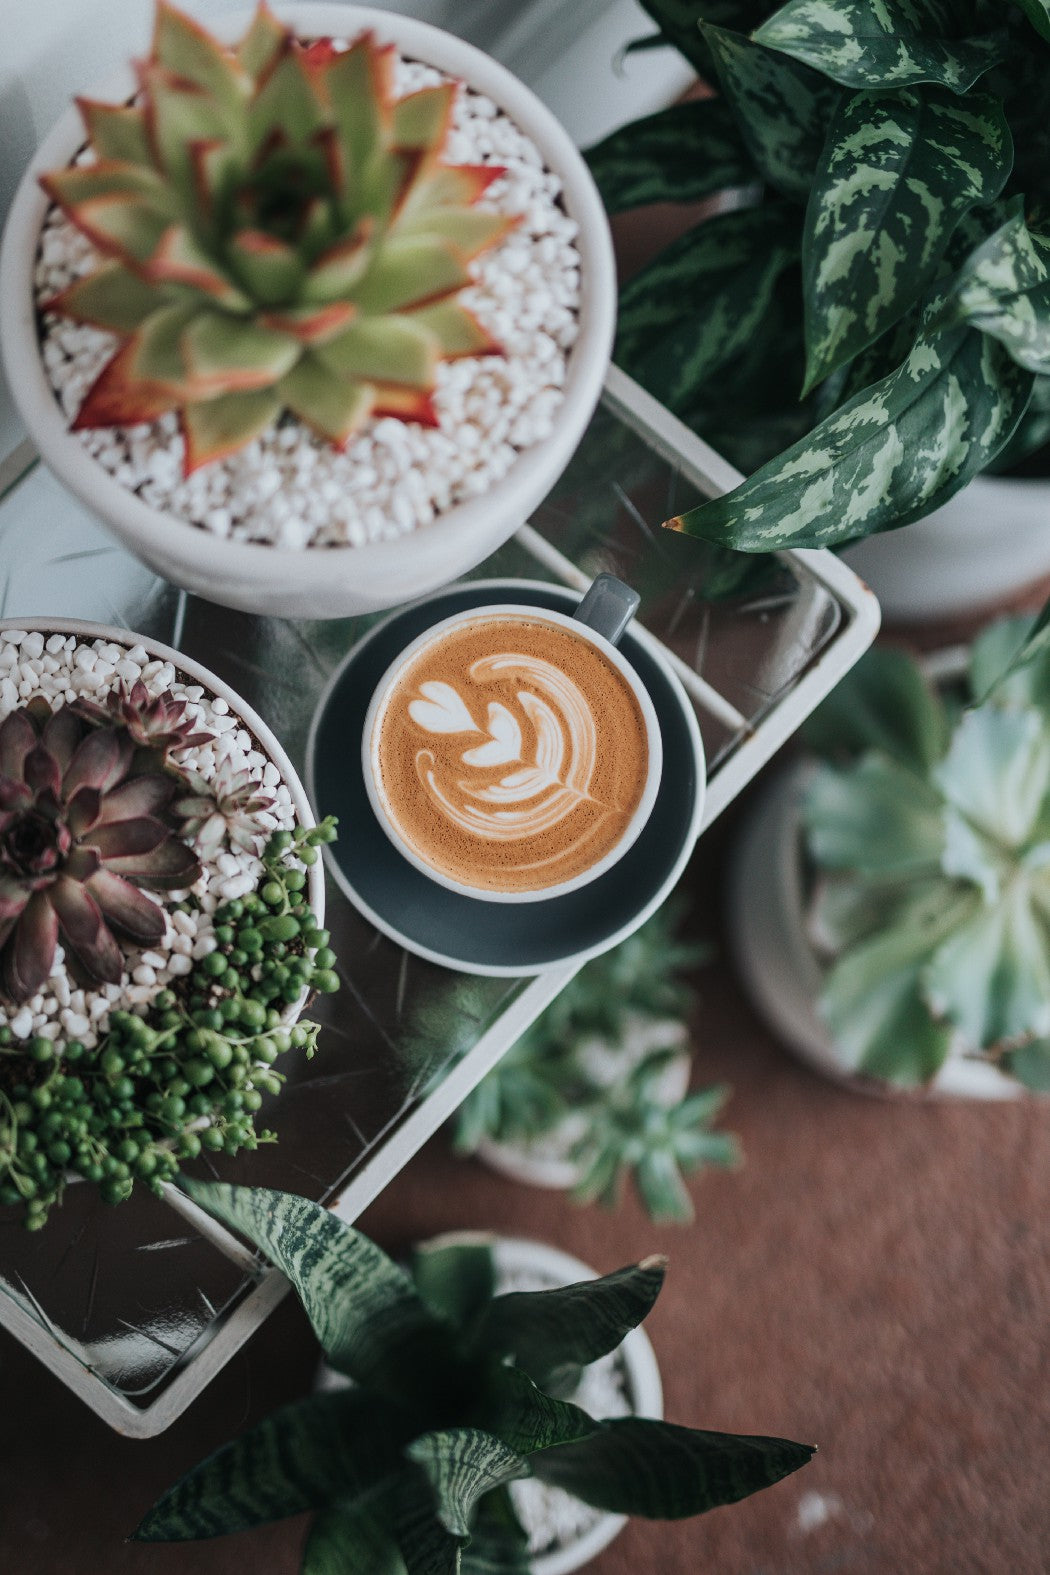  Terra Kaffe | Cappuccino surrounded by various plants